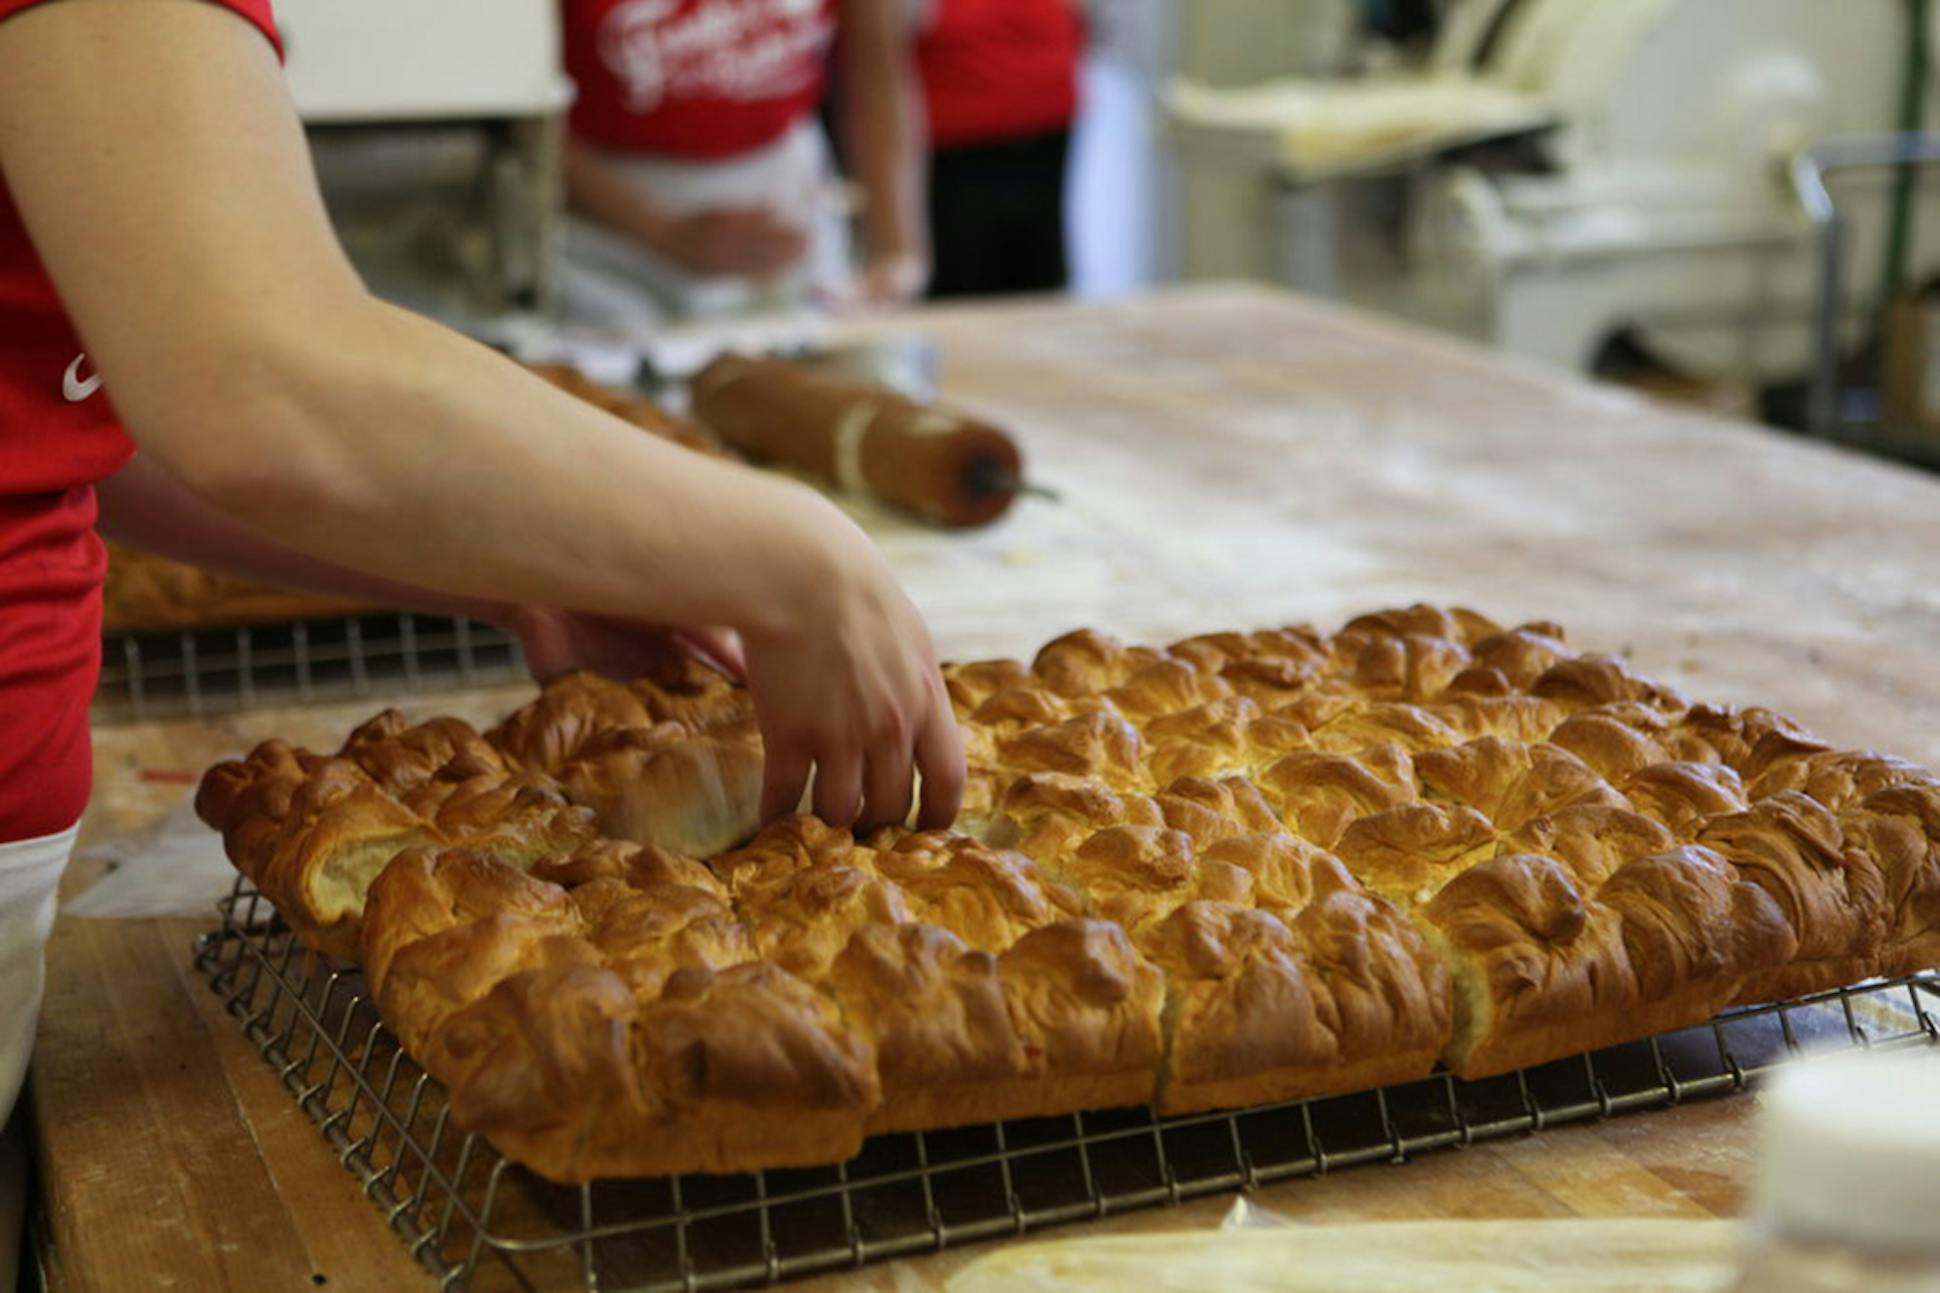 The fruit-filled bun that started it all. Each summer, the town of Montgomery celebrates Kolacky Days.